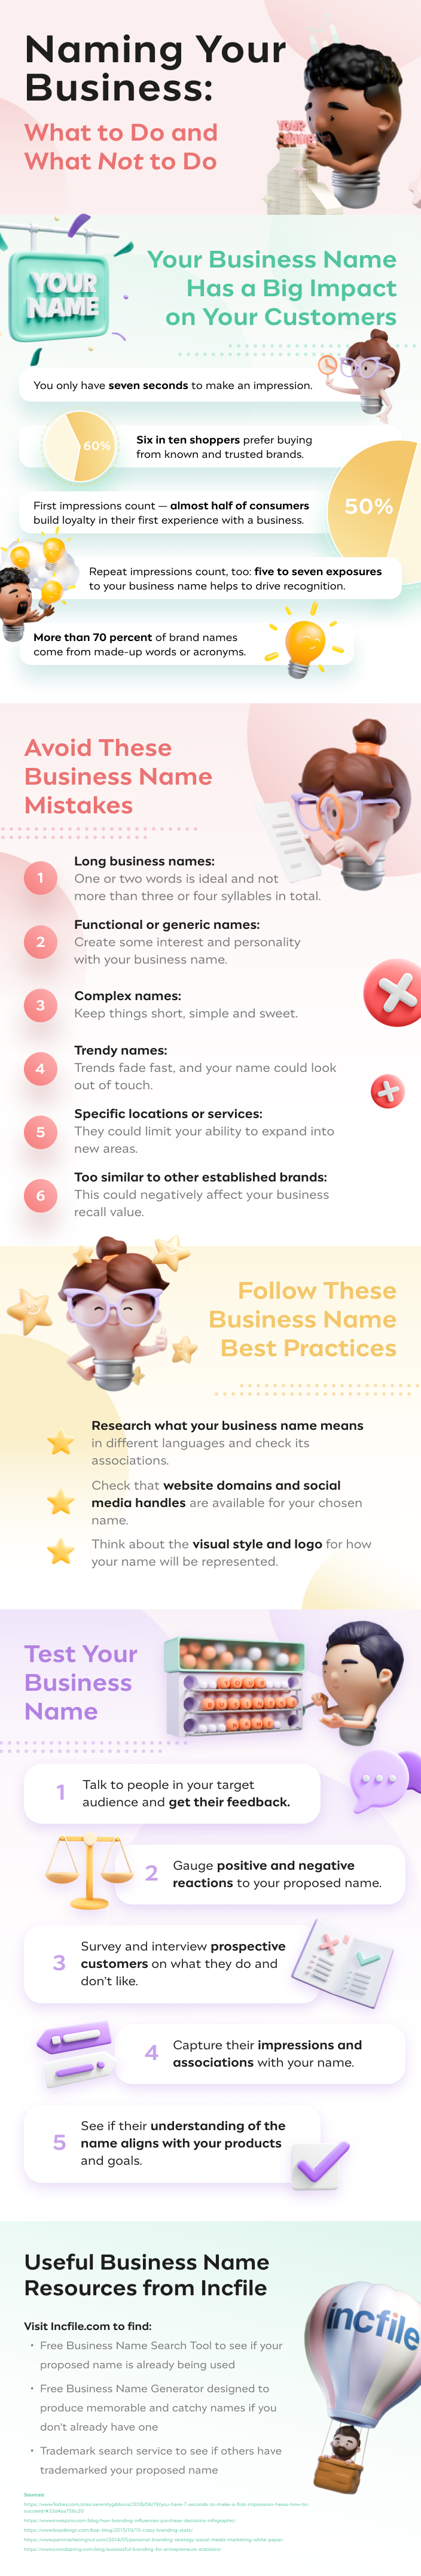 naming your business best practices